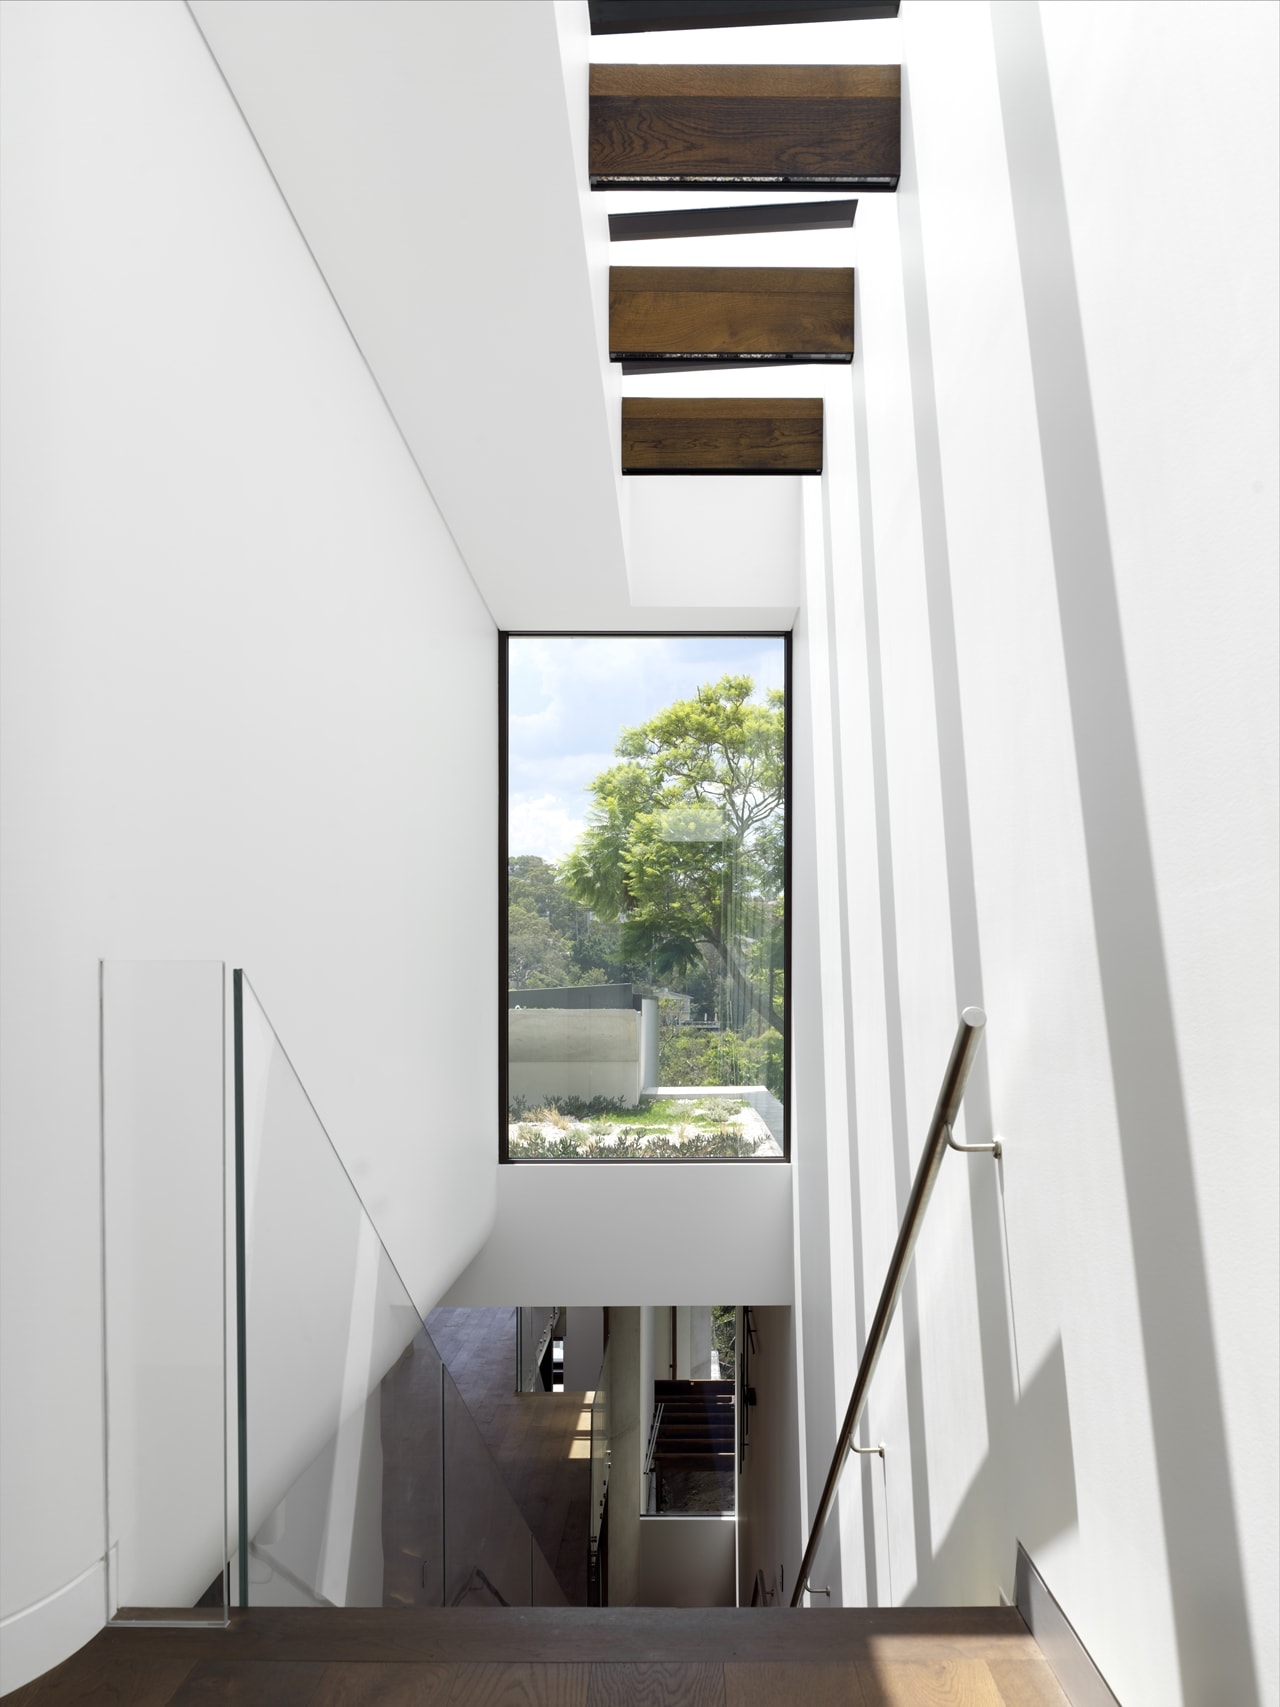 Simple staircase design in a hillside house designed by Rolf Ockert